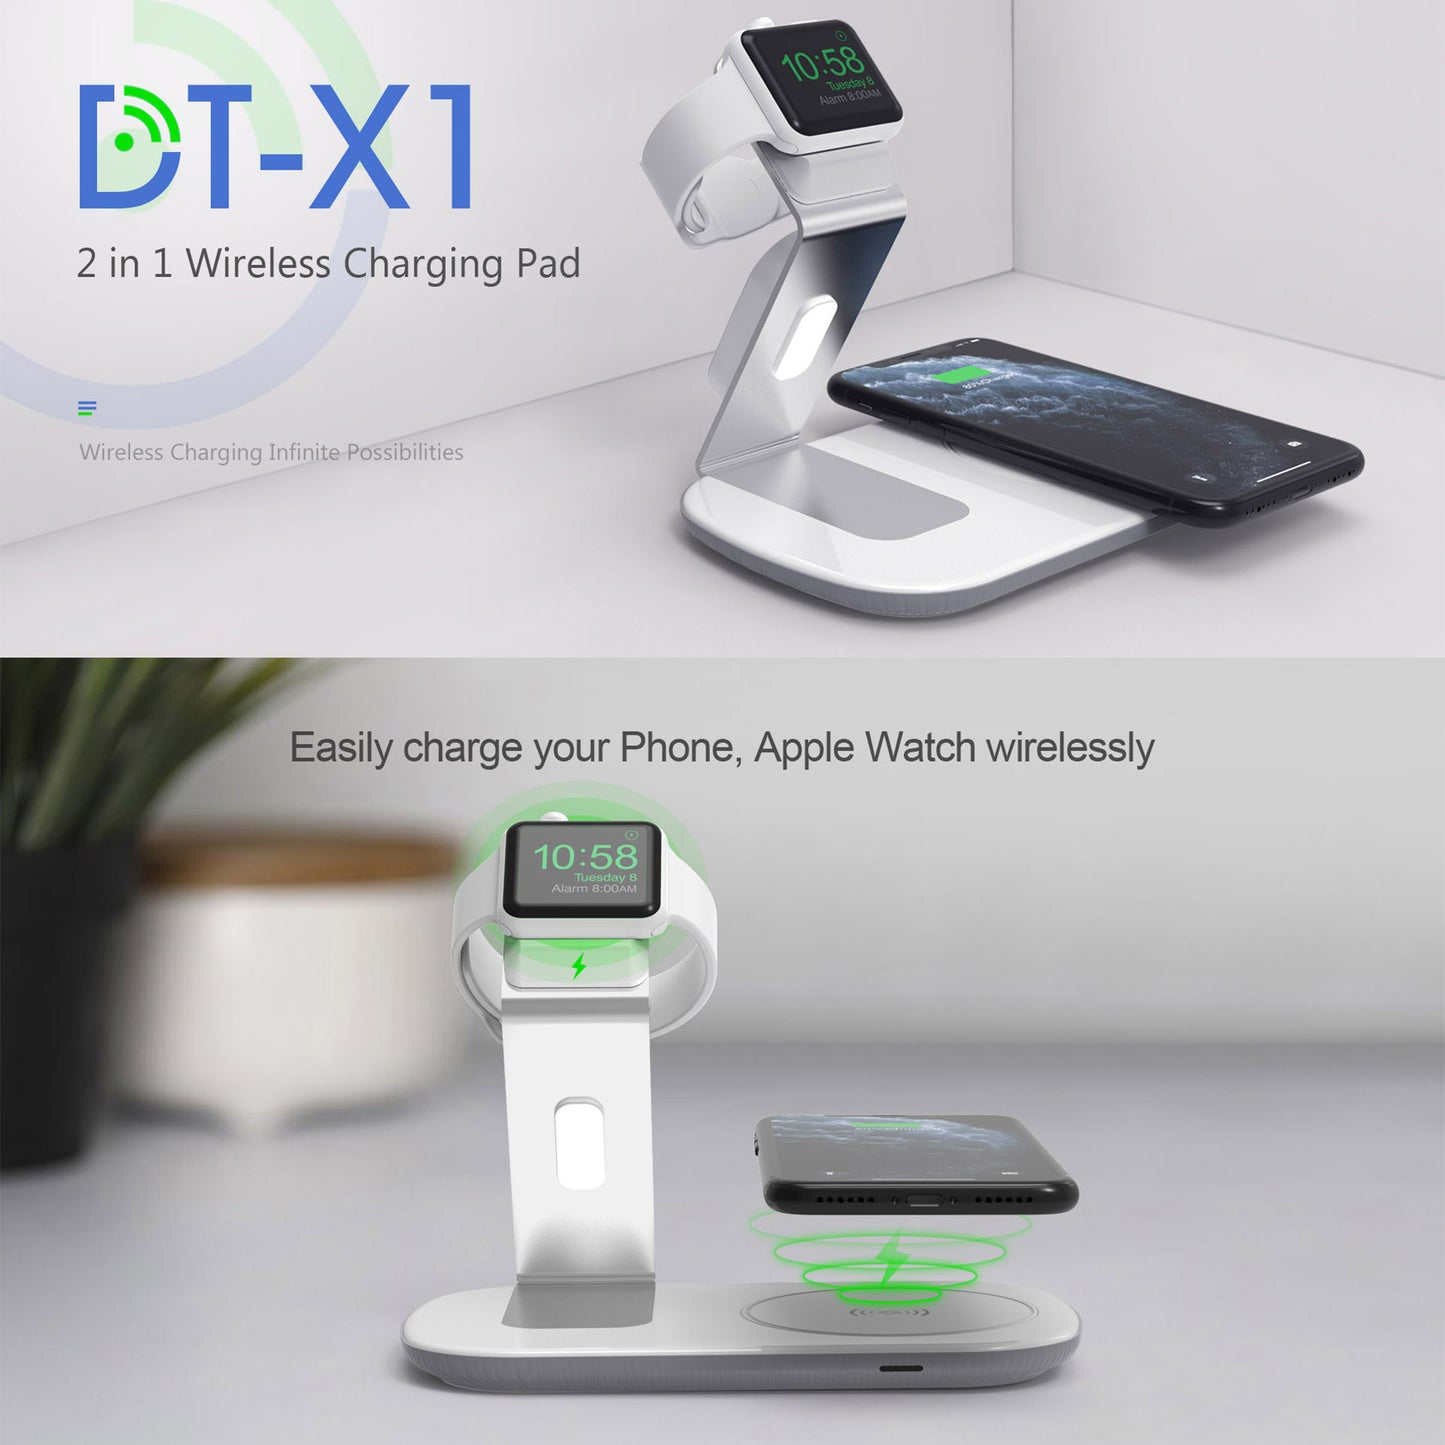 RGBTRON DT-X1 2 in 1 Wireless Charging Station, 2021 Upgraded 15W Fast Wireless Charger Stand Dock Compatible with Apple Watch SE 6 5 4 3 2, Airpods Pro2 and iPhone 13, 12 Pro max, 12, 11, Xs max, Xr, X (White, Black)